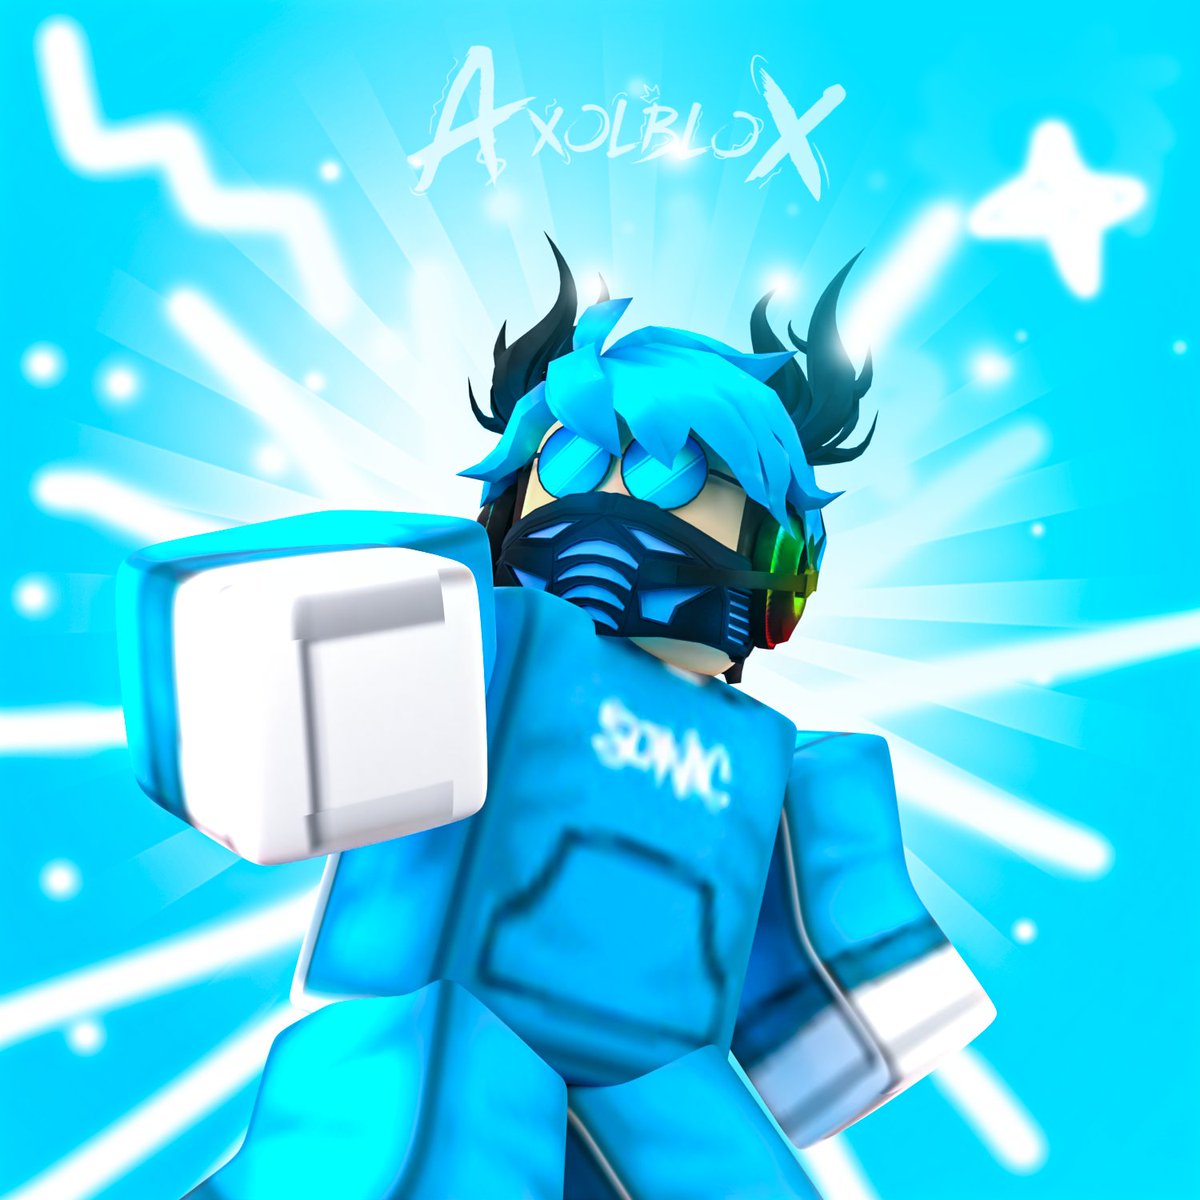 Hiezellblox على X: Next render for @xBl_nde !! Cute bad boy?!😆 #Roblox  #RobloxDev #commisionsopen #Comision #RobloxGFX #robloxart #sheet   / X